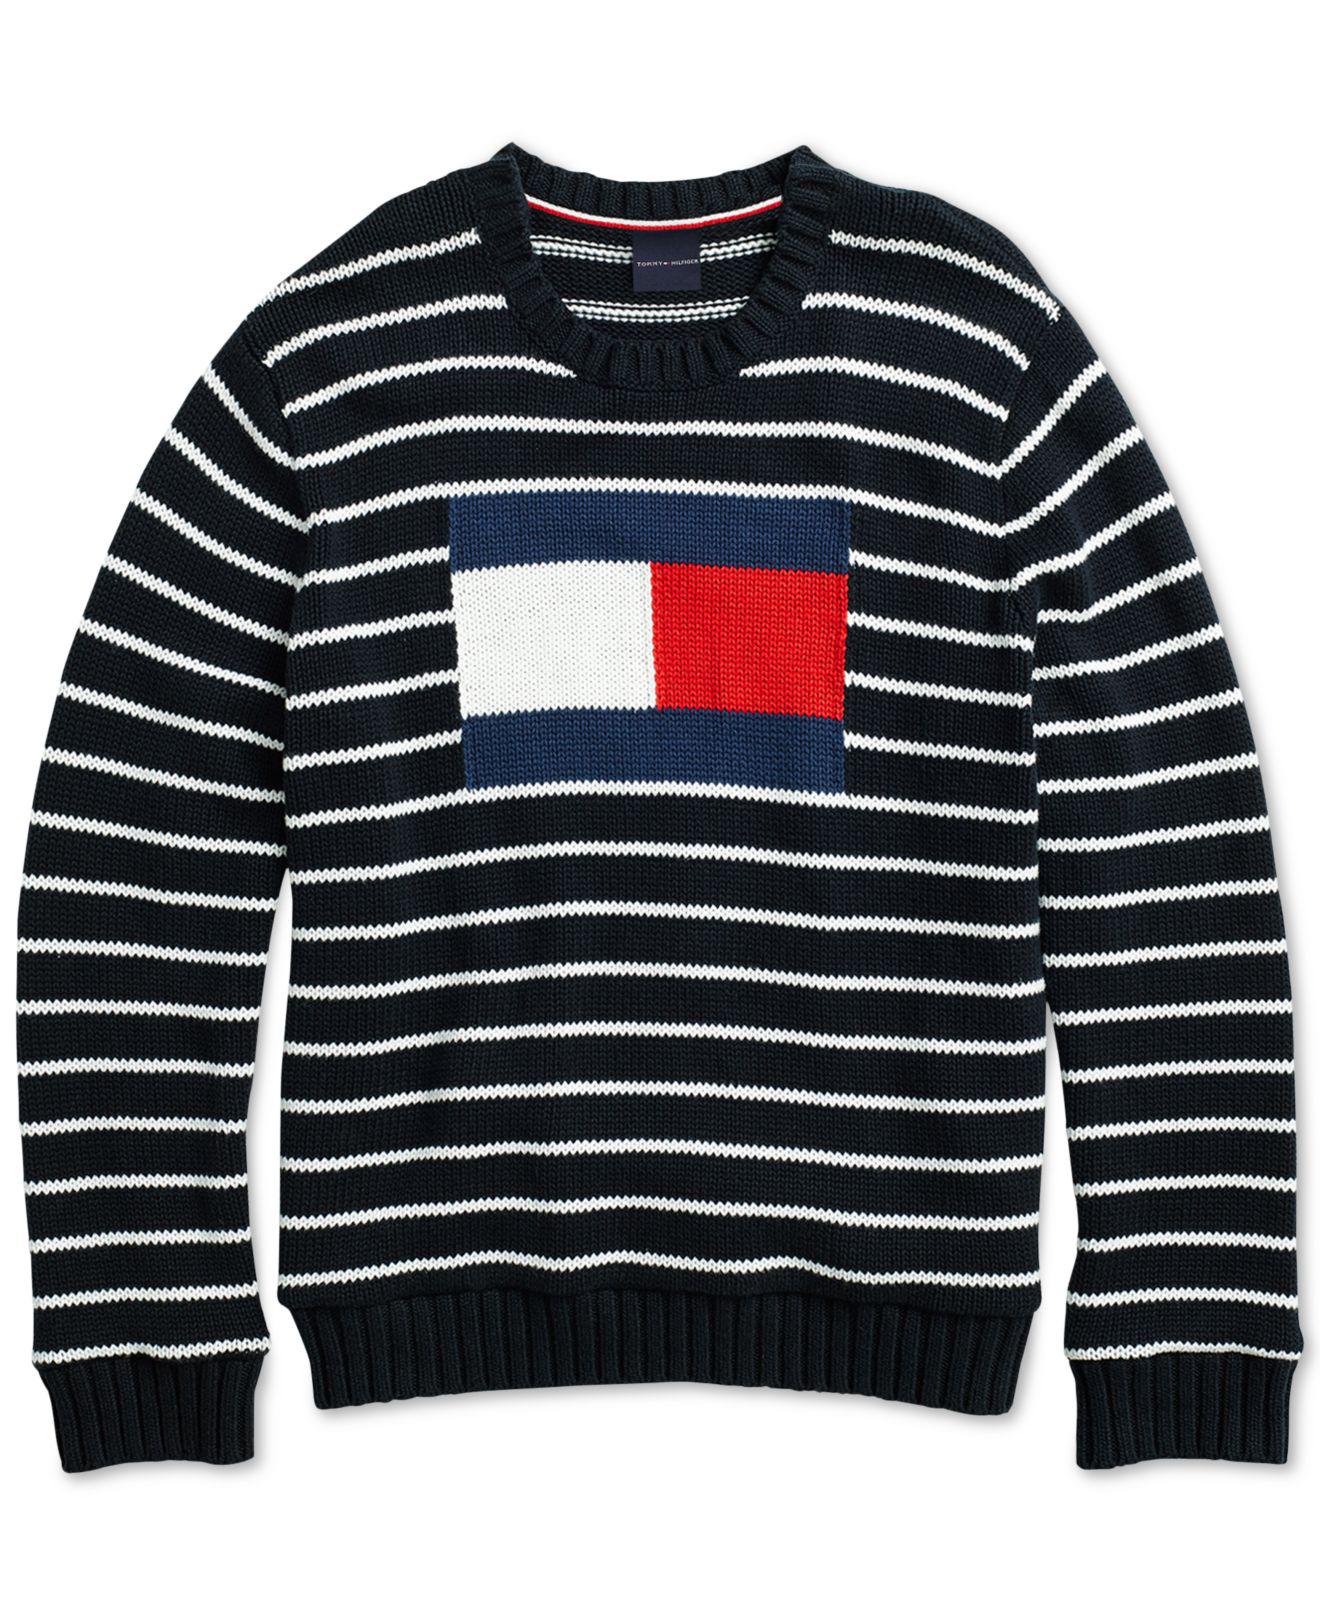 Tommy Hilfiger Mens Adaptive Sweater with Velcro Brand Closure at Shoulders